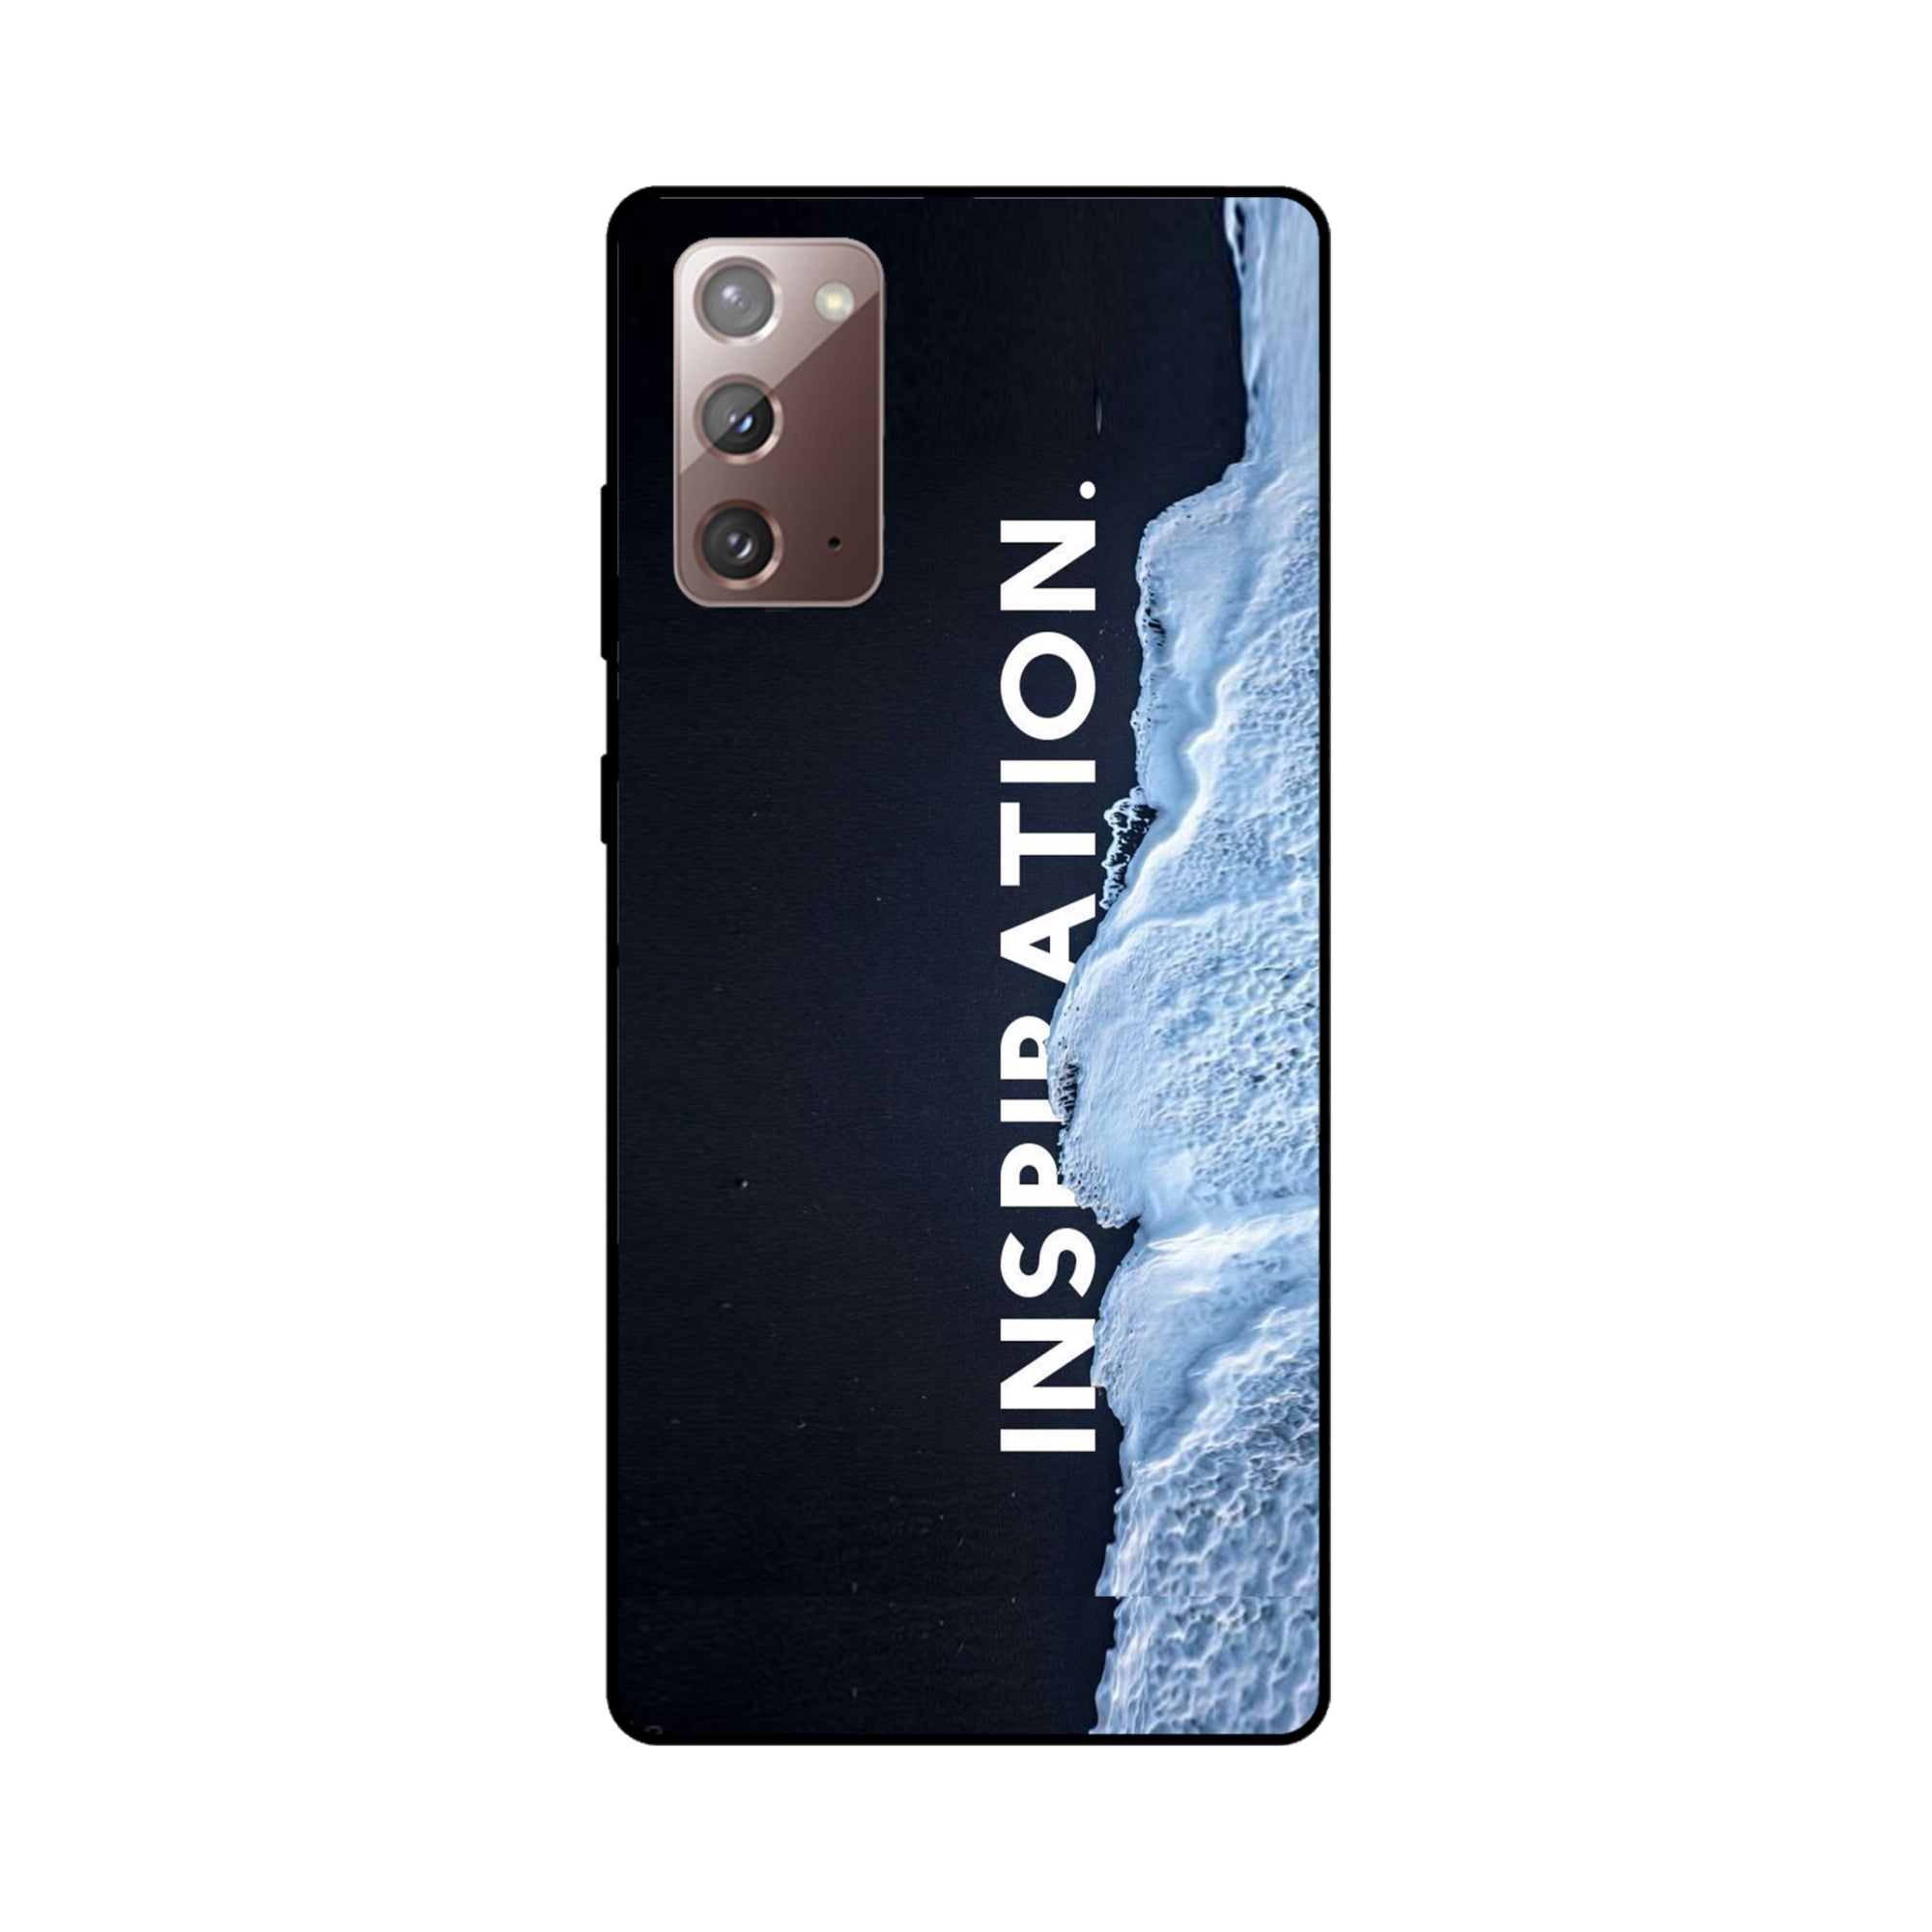 Buy Inspiration Metal-Silicon Back Mobile Phone Case/Cover For Samsung Galaxy Note 20 Online